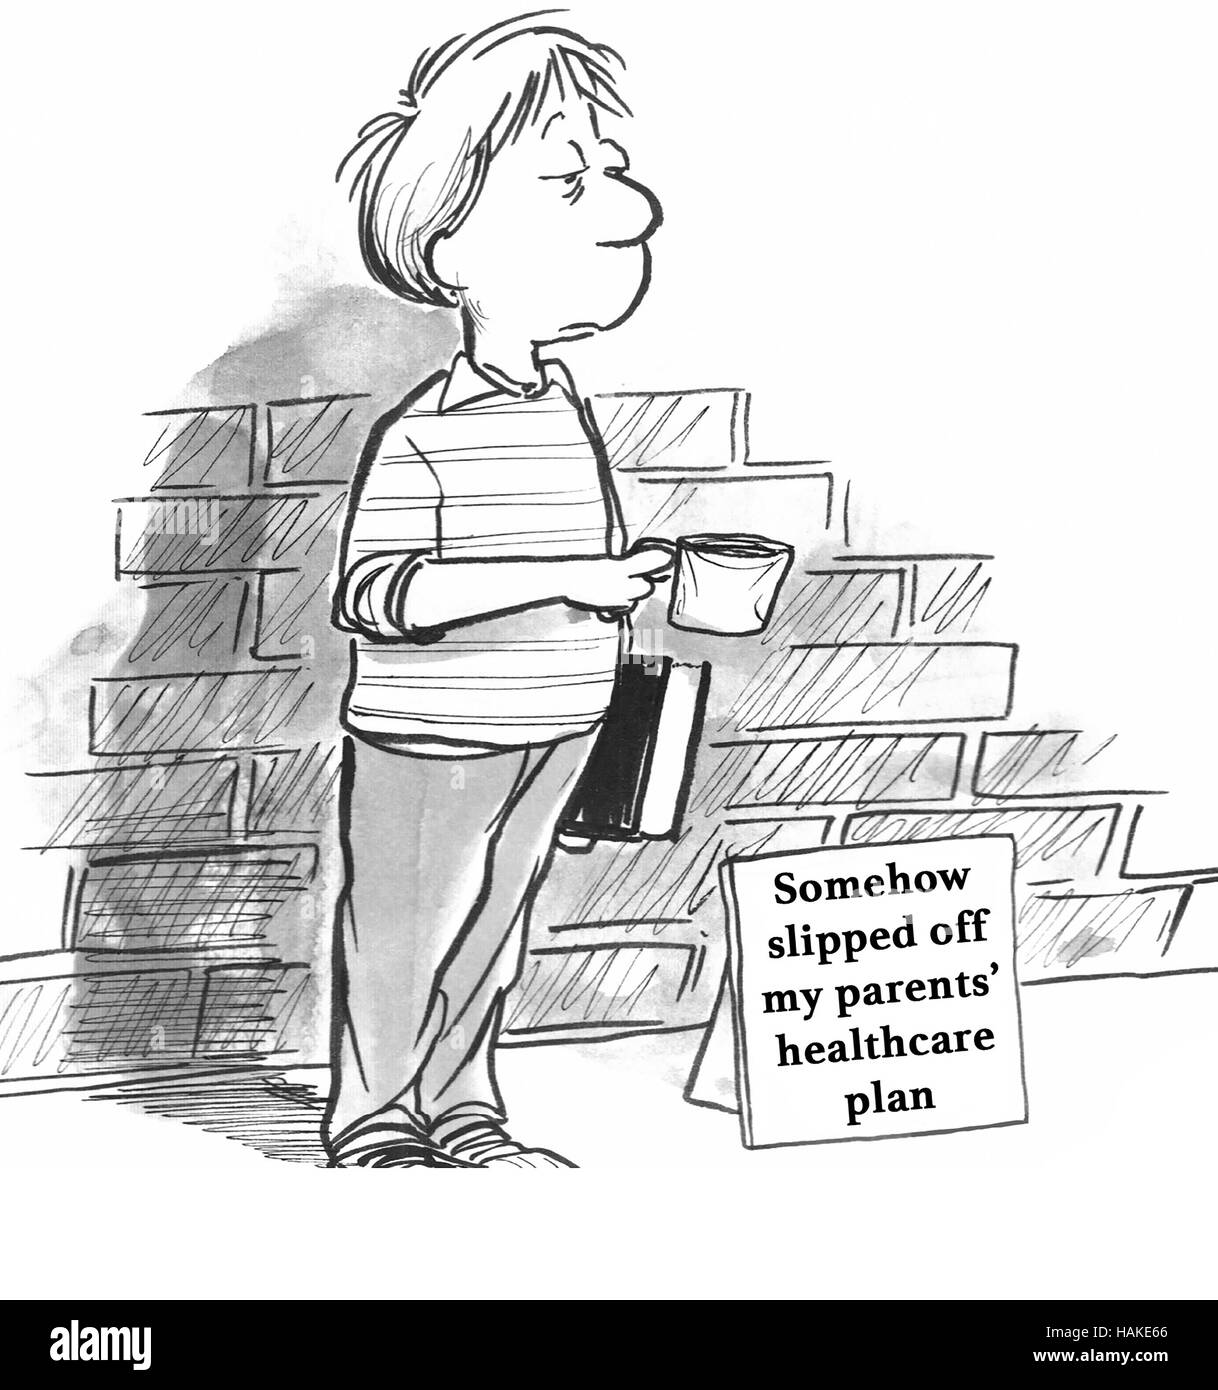 Black and white healthcare illustration about a boy begging for money to pay for his health insurance. Stock Photo